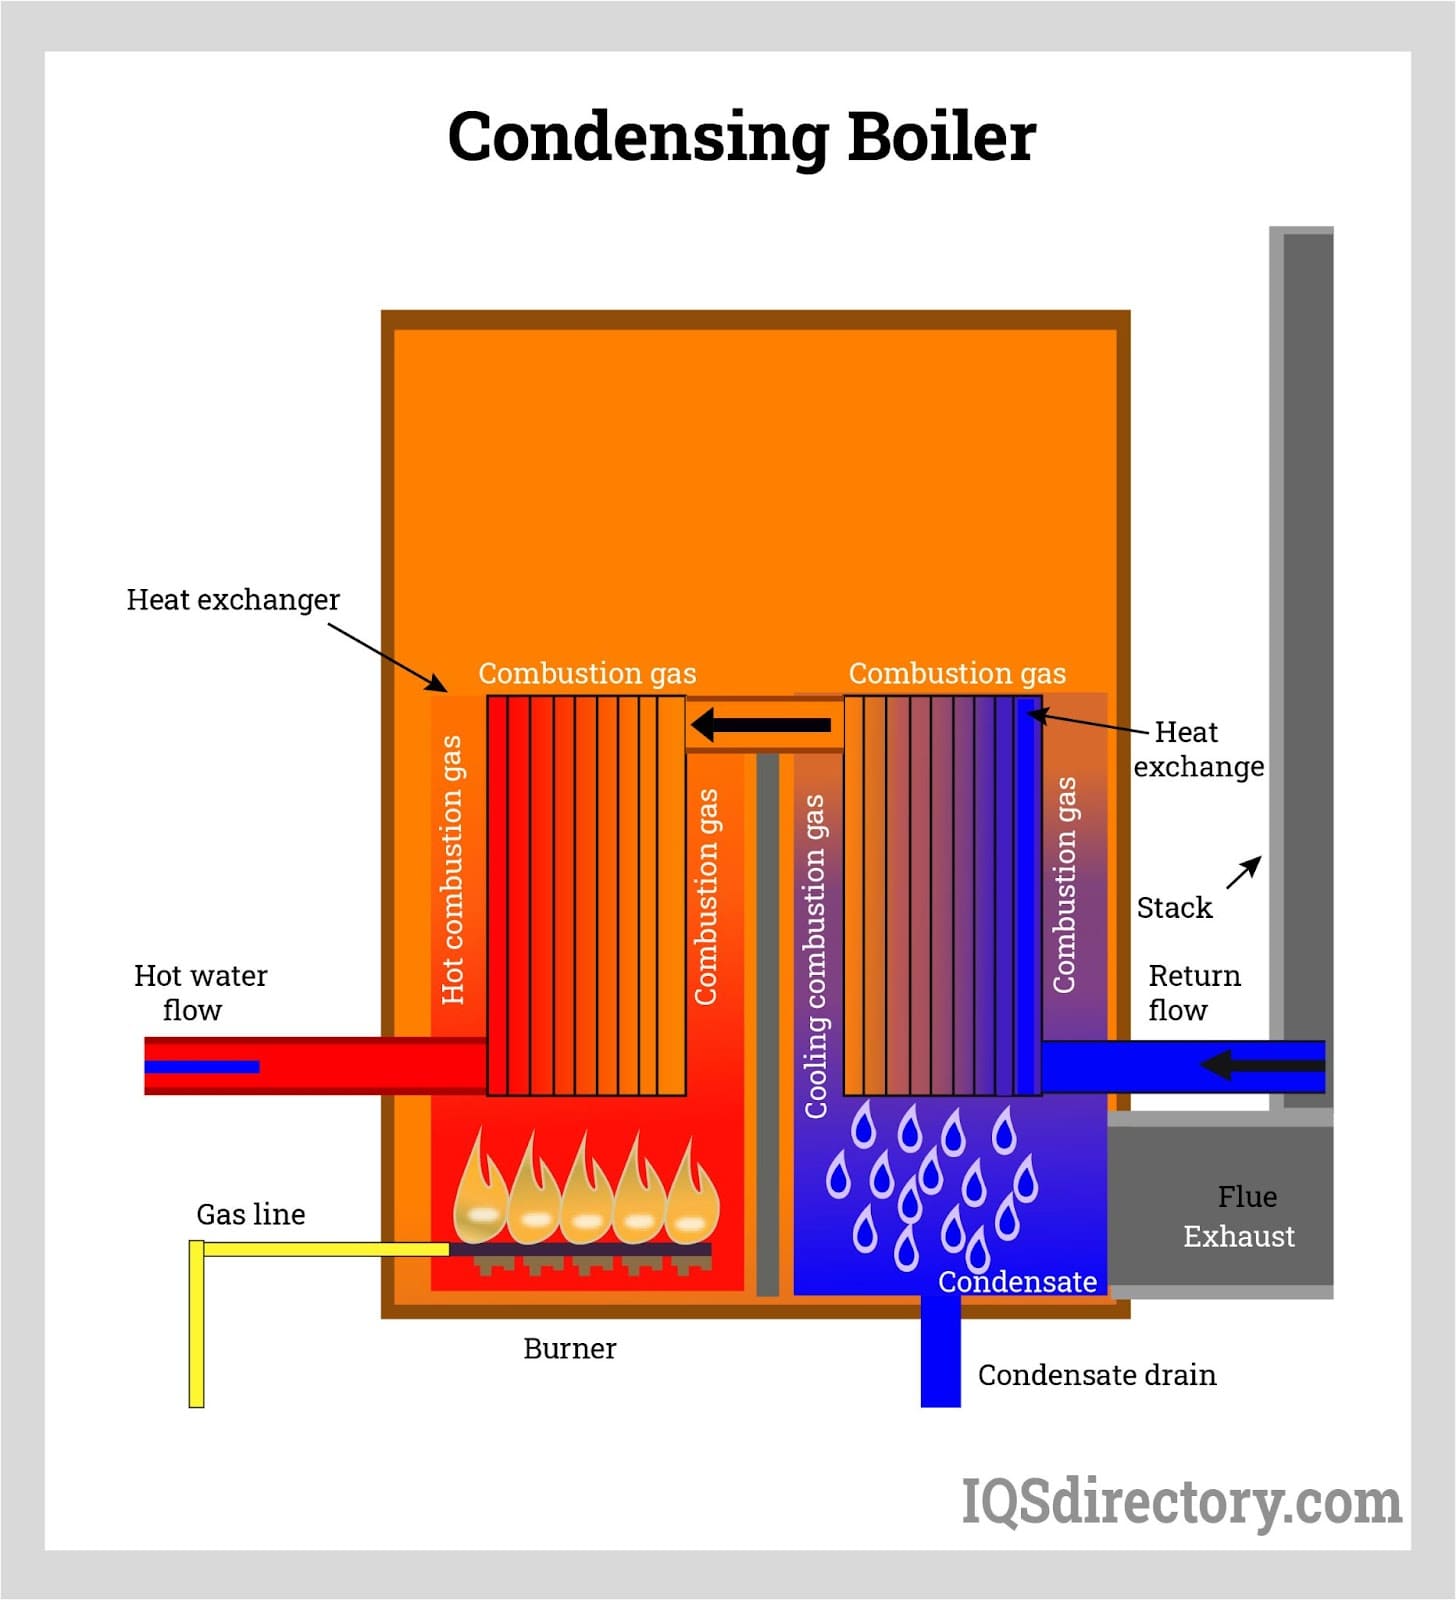 dok dialect periodieke Condensing Boiler Manufacturers Suppliers